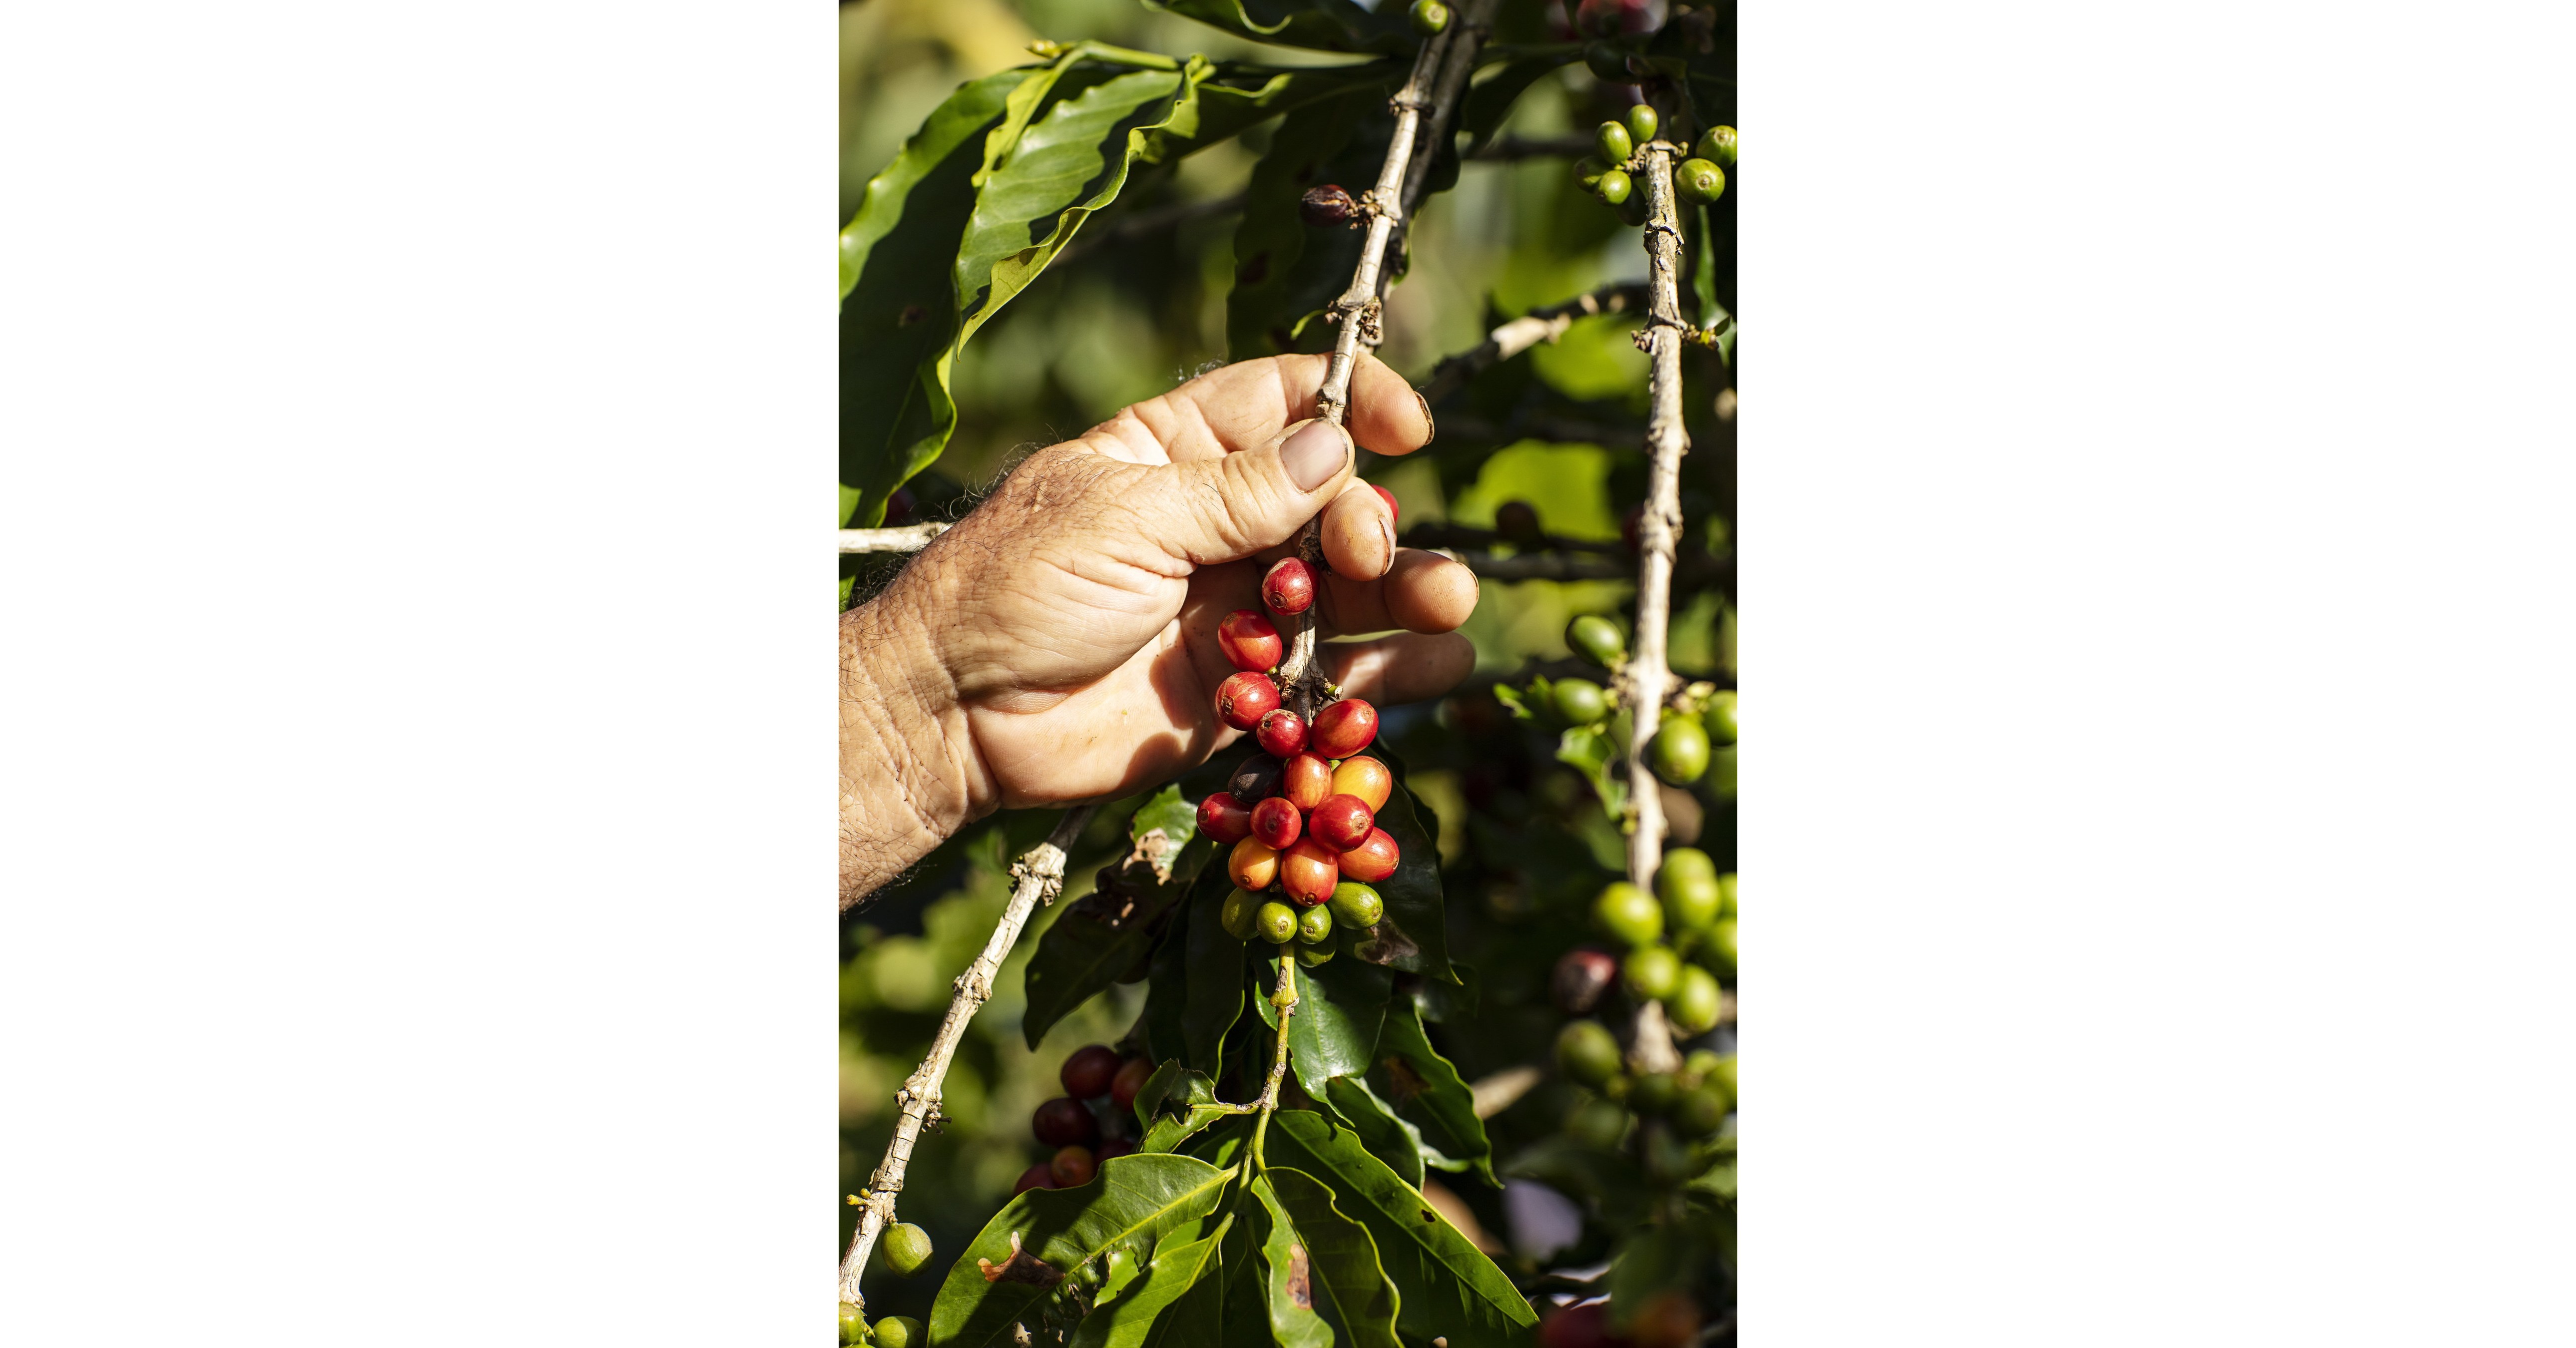 nespresso-s-investment-in-coffee-seedlings-and-regenerative-agriculture-helps-puerto-rico-s-coffee-industry-rebound-to-pre-2017-hurricane-levels